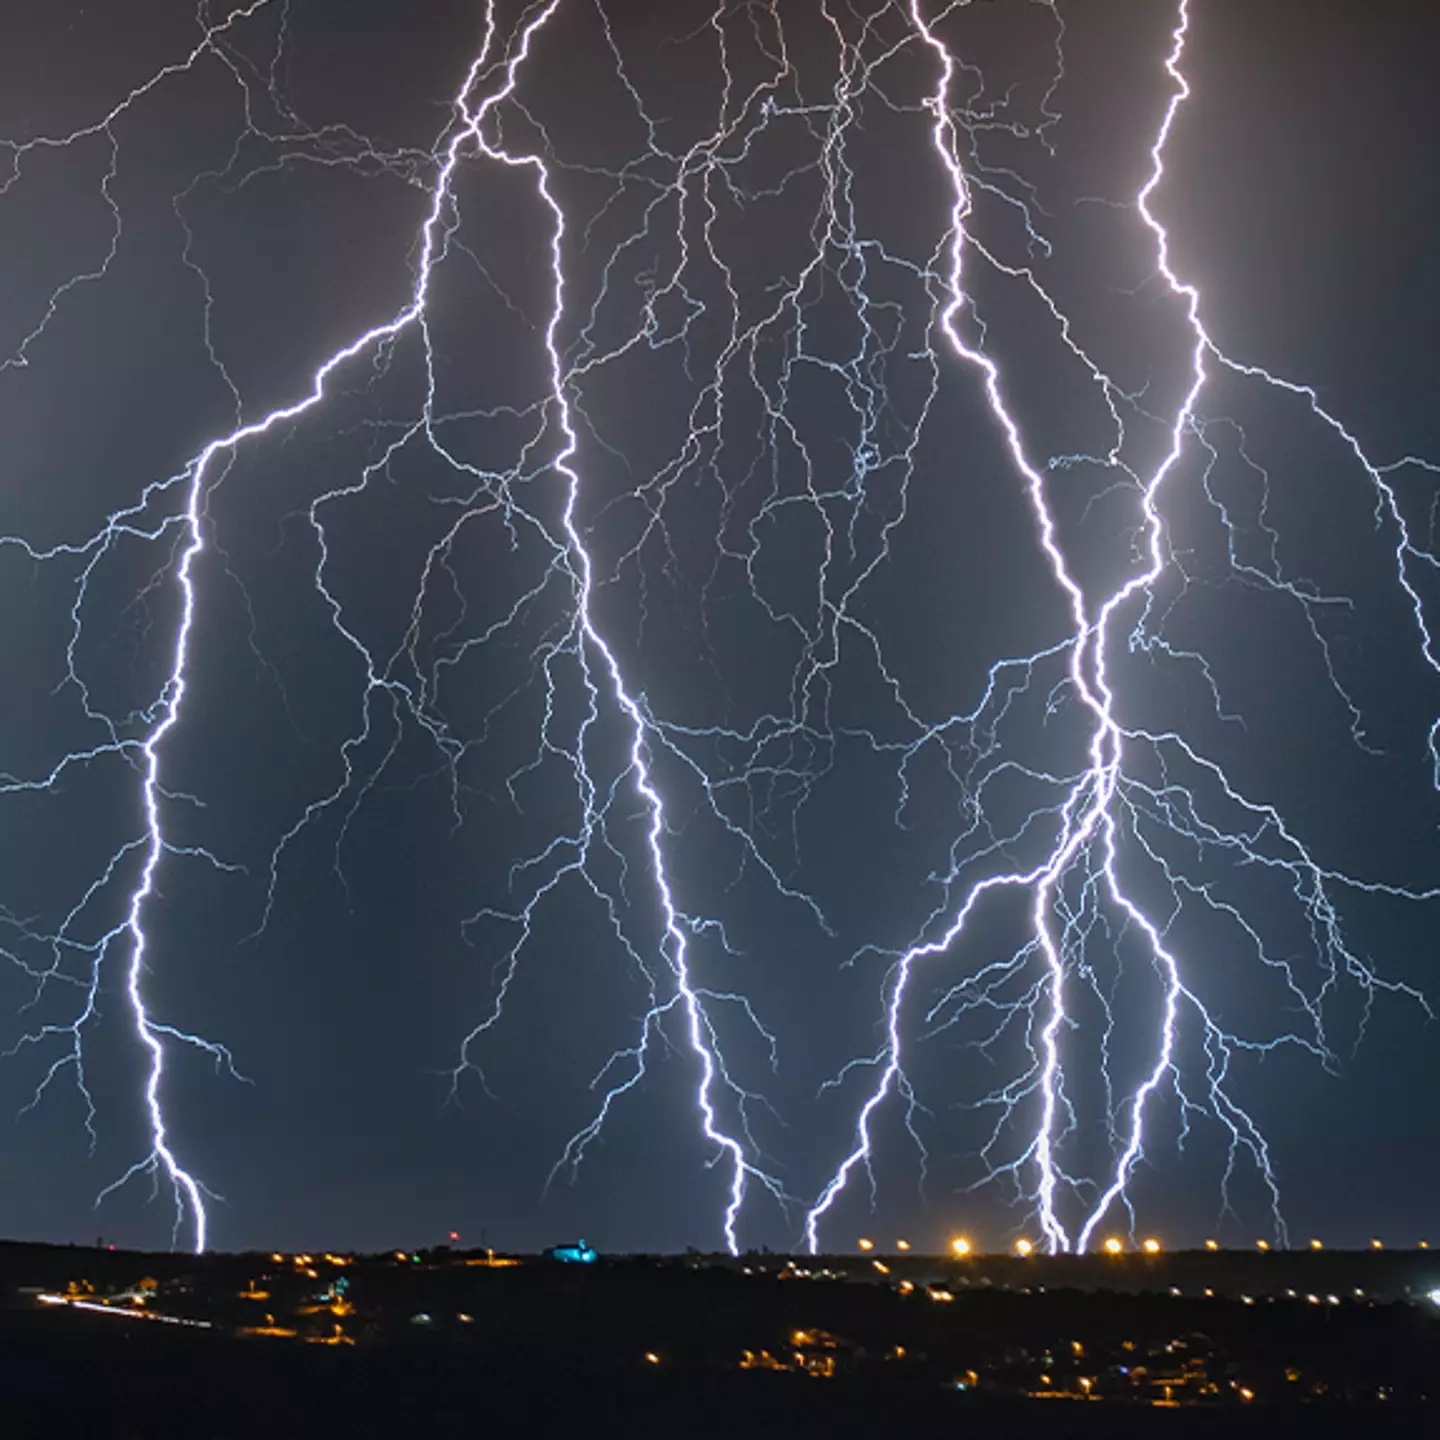 Thunderstorm from space captured in mind-blowing video from ISS